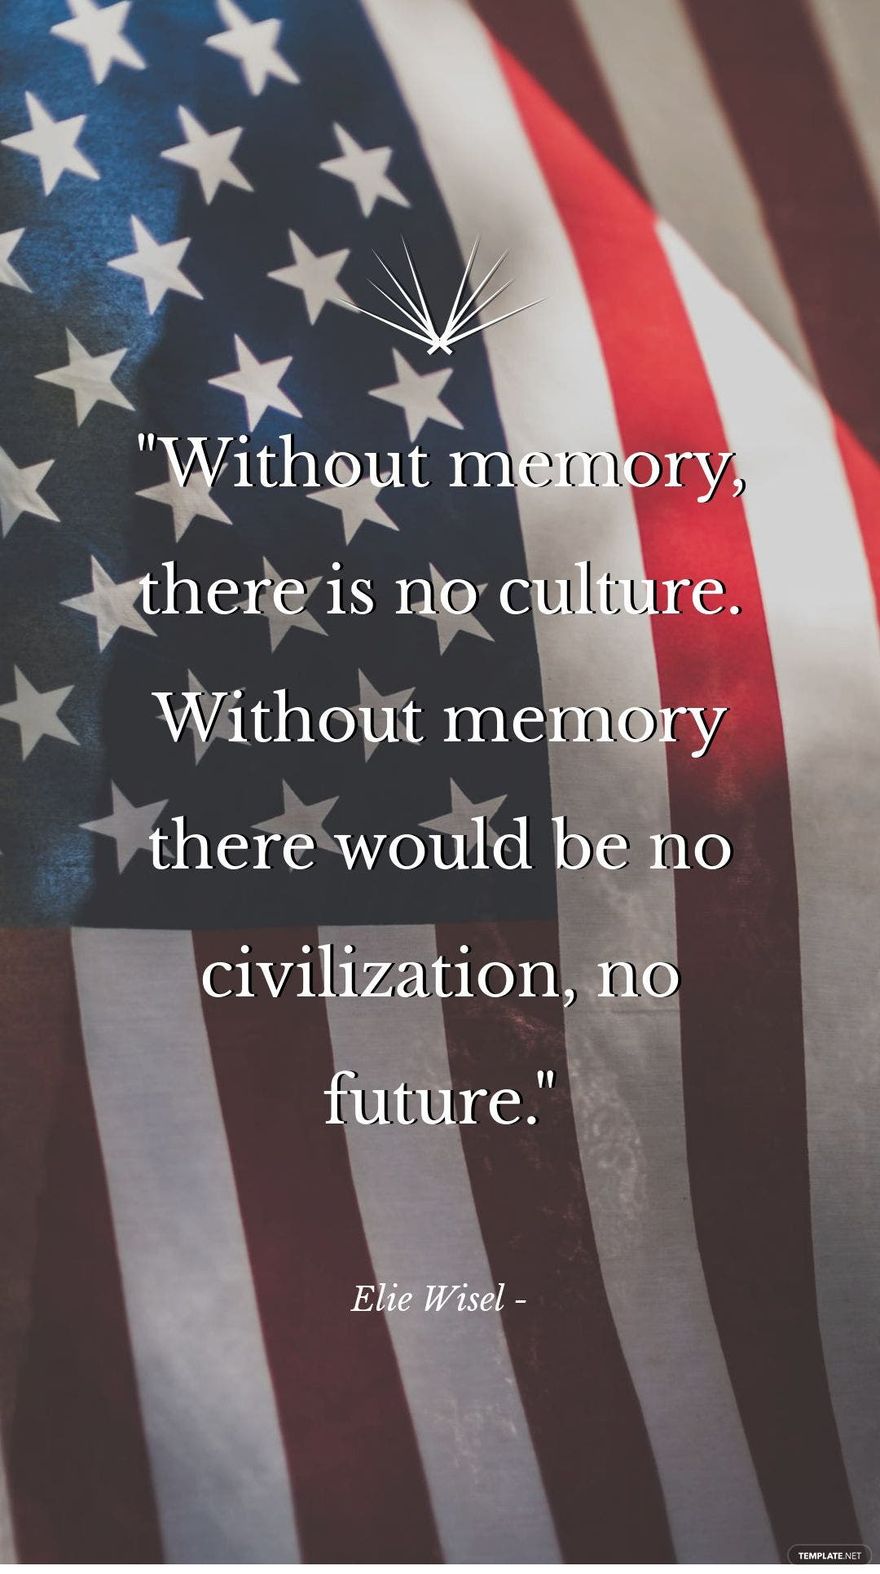 Elie Wisel - Without memory, there is no culture. Without memory there would be no civilization, no future.